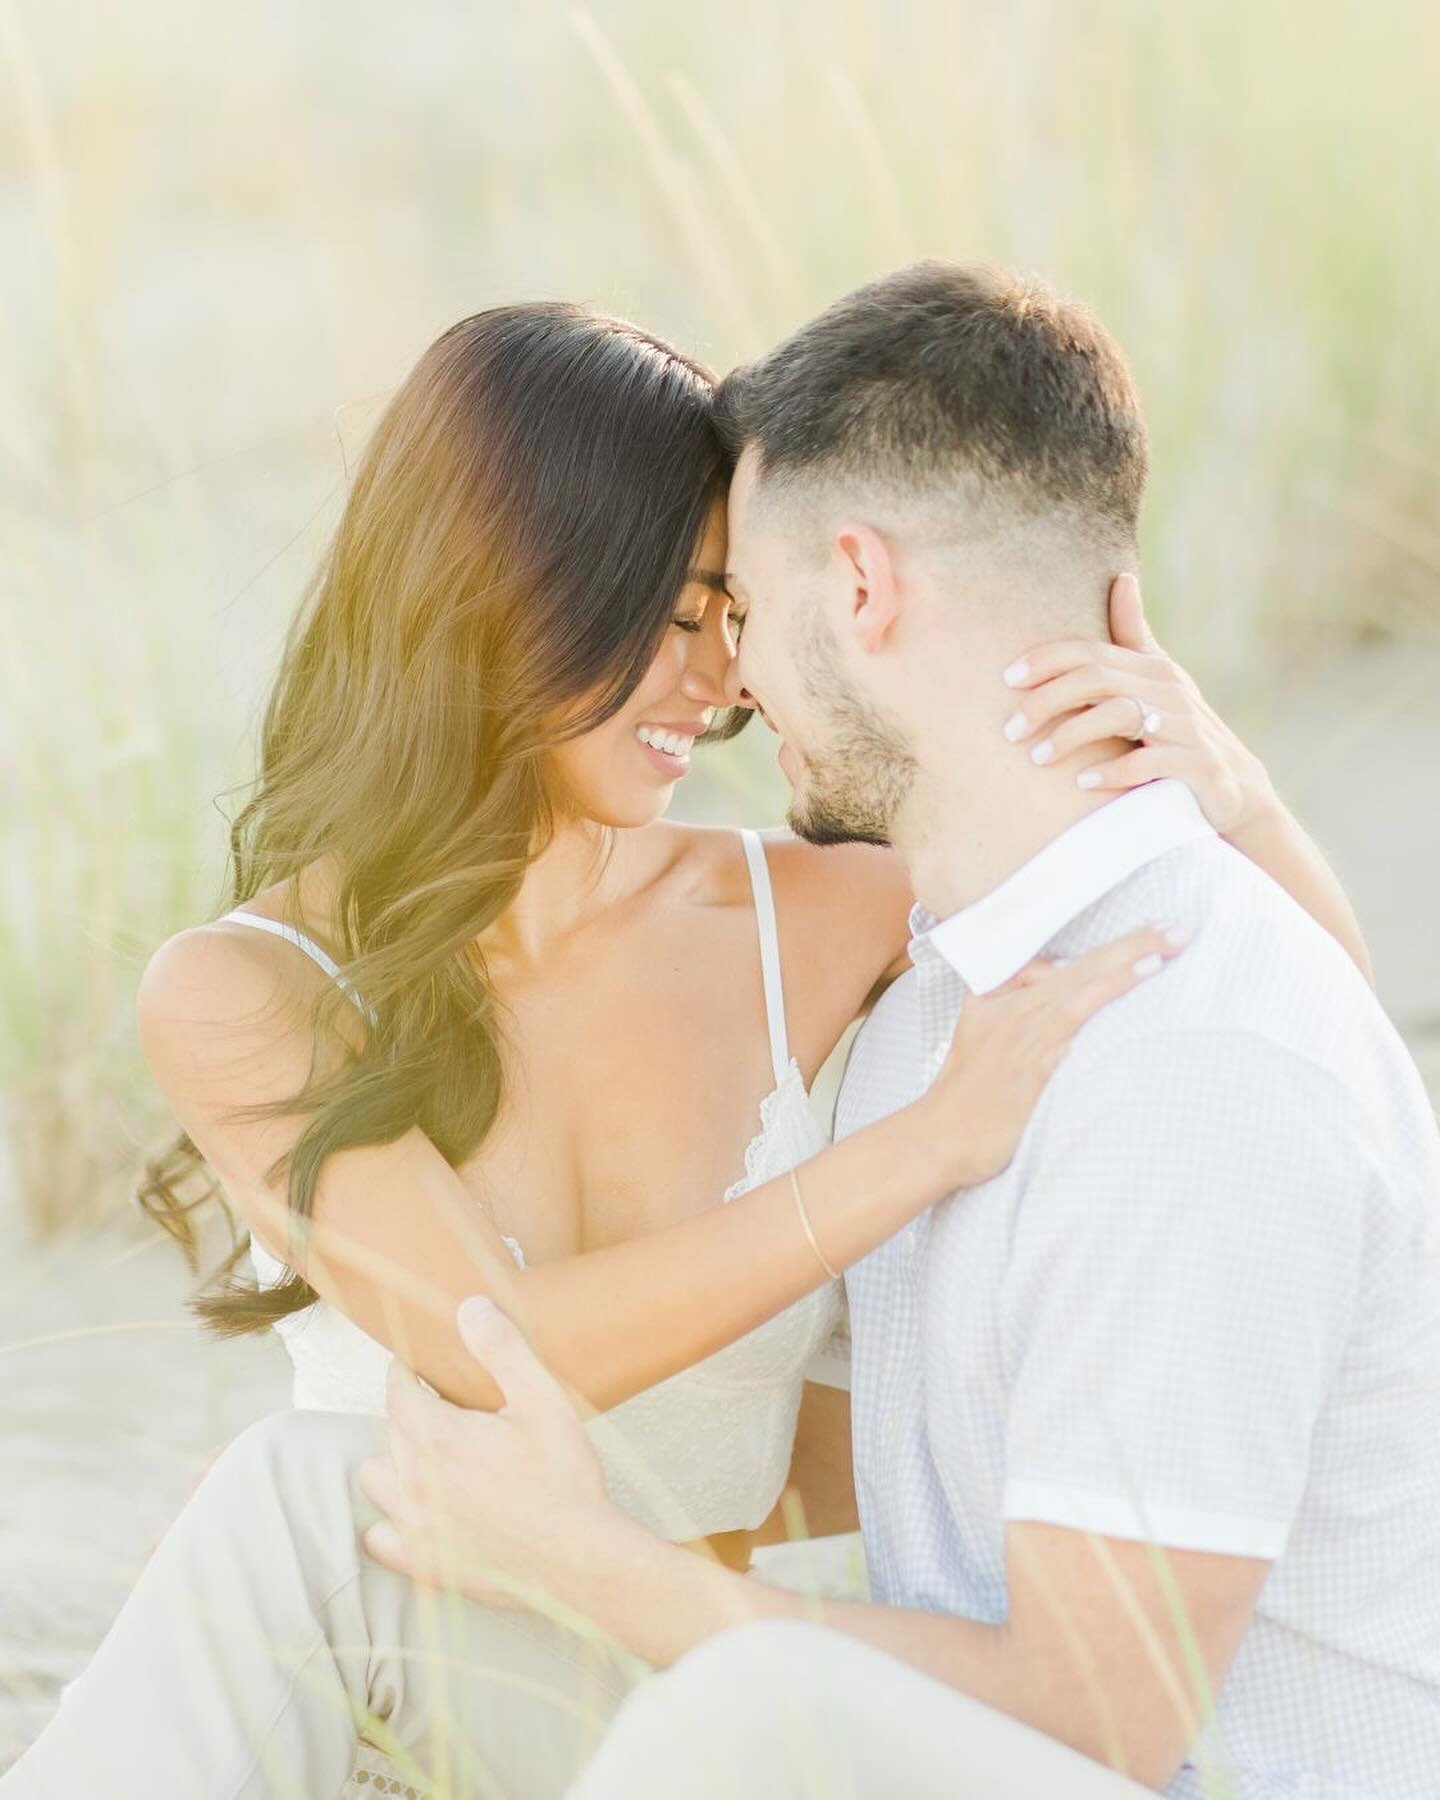 Swipe for one of the prettiest skies to date, cute pups, and see if you can make out the NYC skyline in slide #6. The perfect conditions for beach photos at the Jersey Shore!

This breathtaking sunset engagement session on the beach in Sandy Hook is 